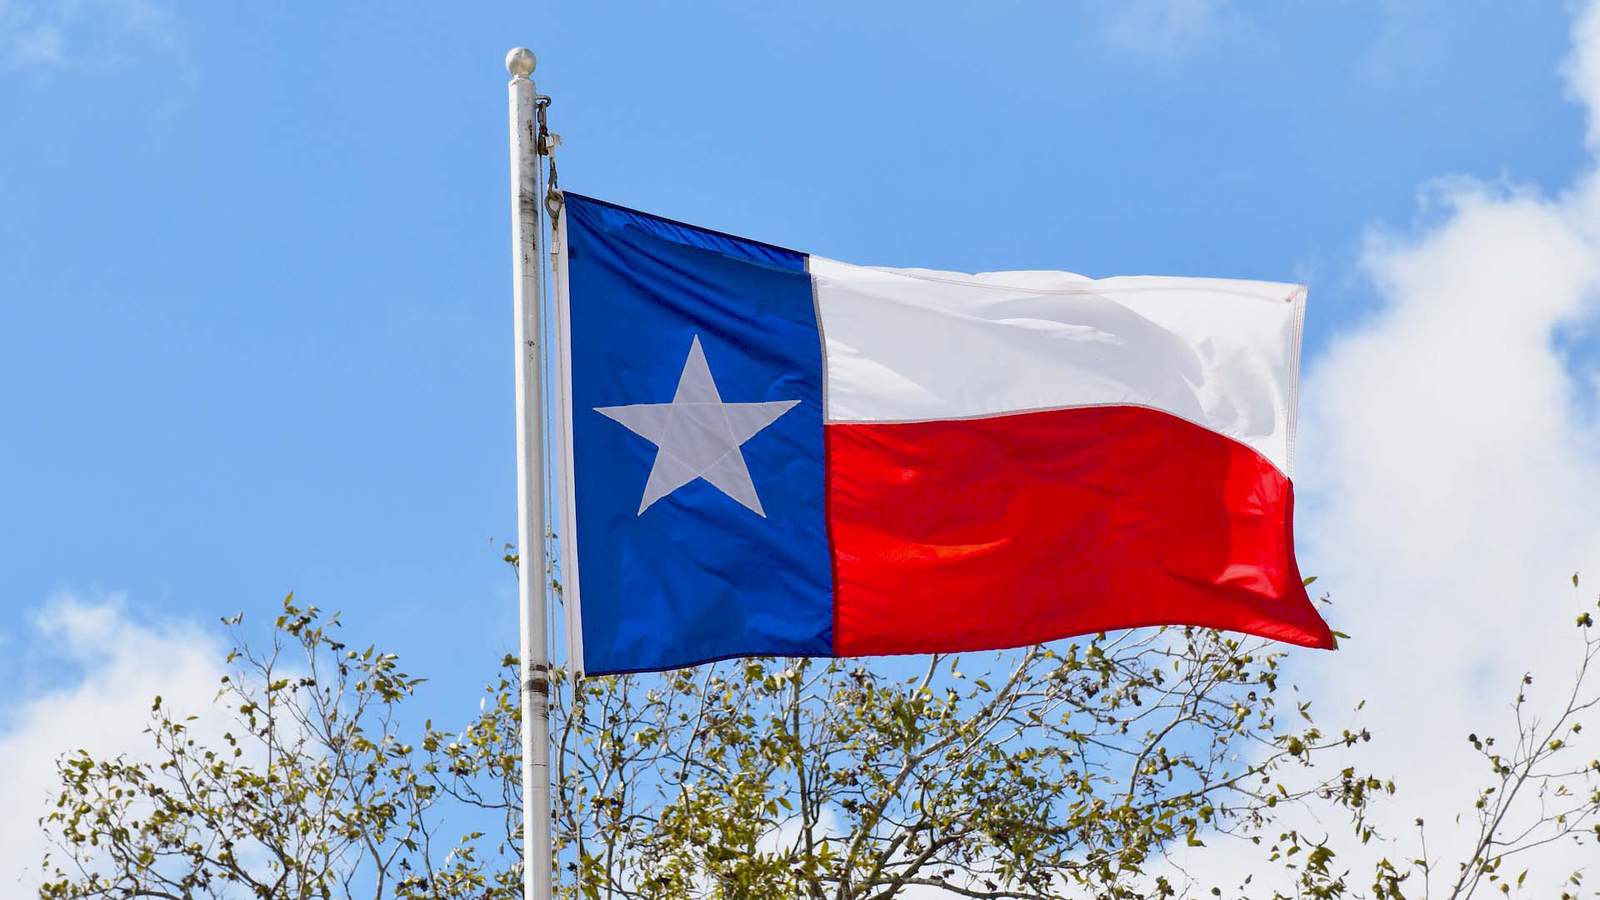 Texas can’t legally secede from the U.S., despite popular myth